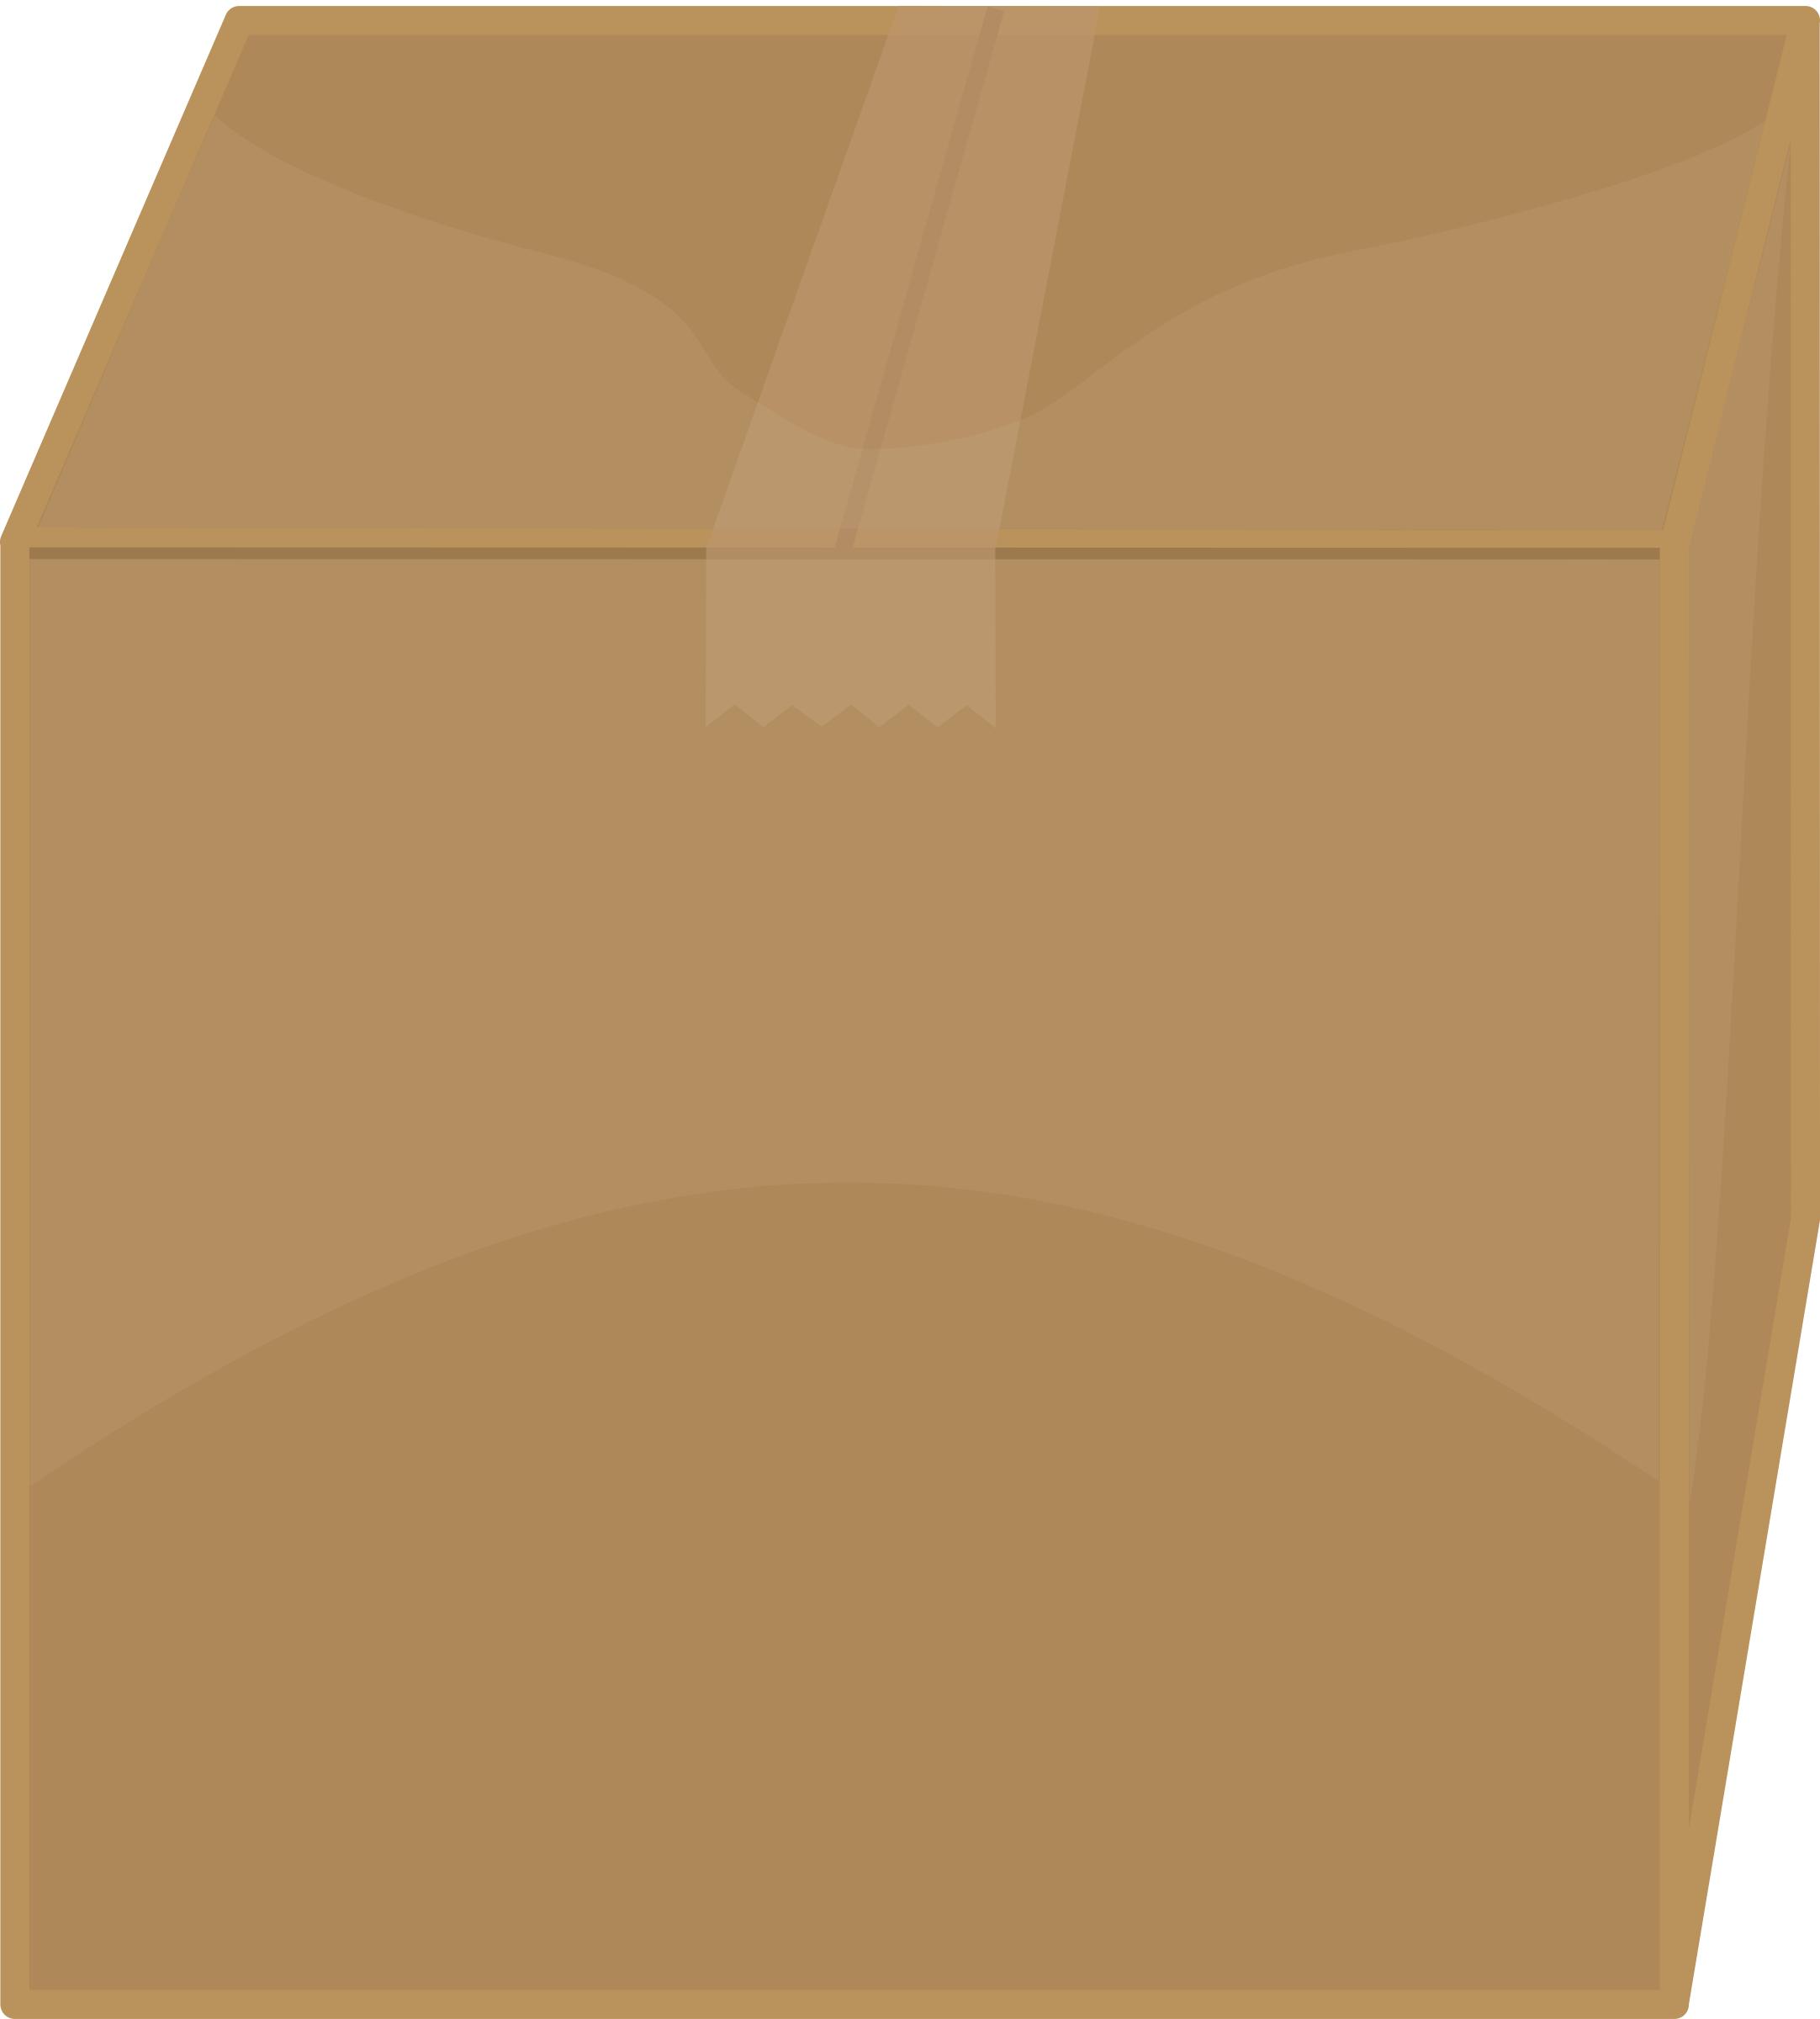 Cardboard Box PNG icons